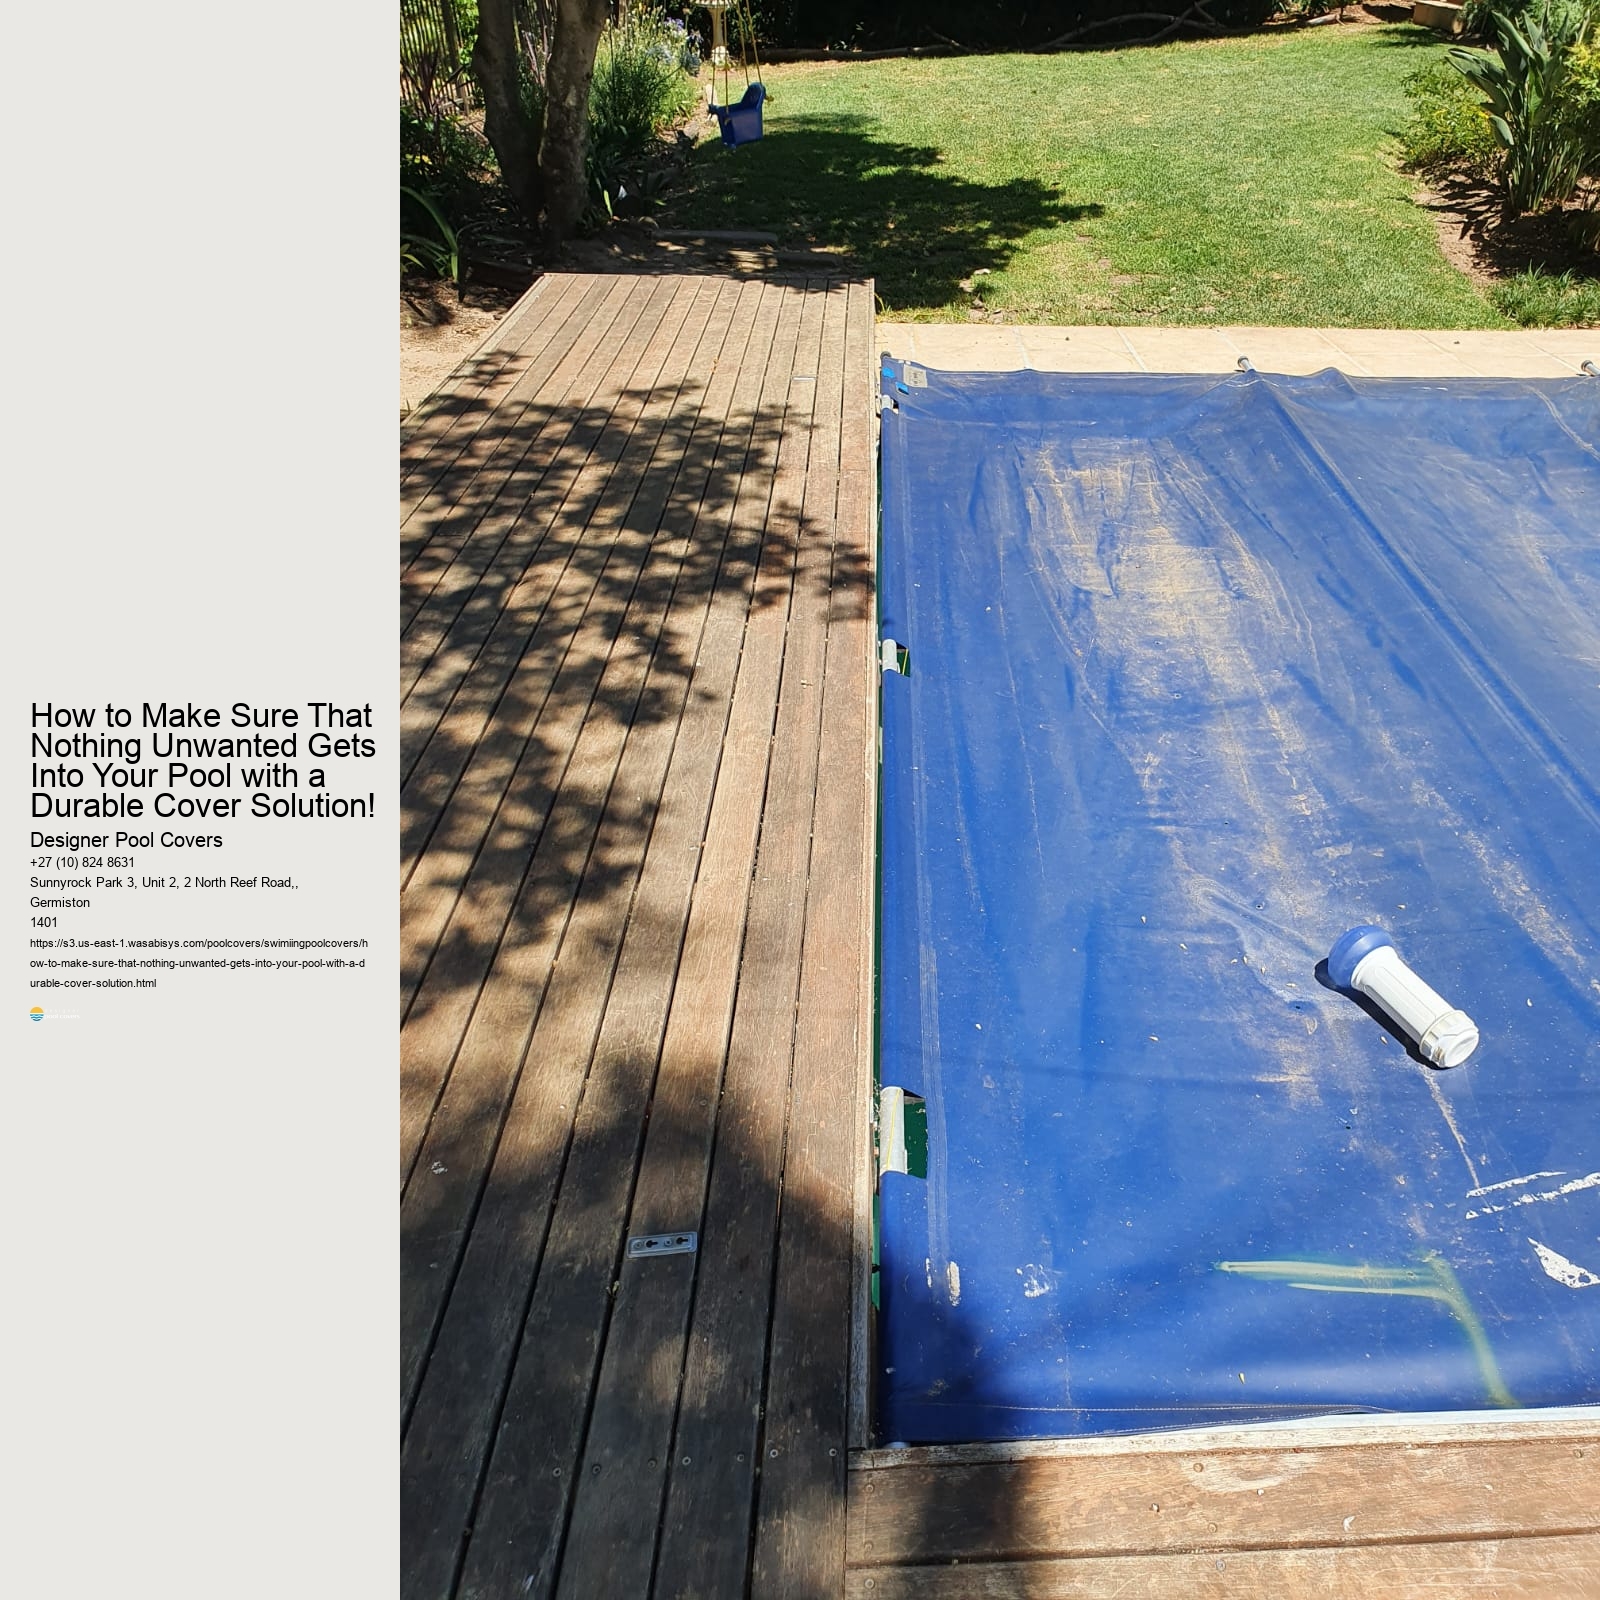 How to Make Sure That Nothing Unwanted Gets Into Your Pool with a Durable Cover Solution!